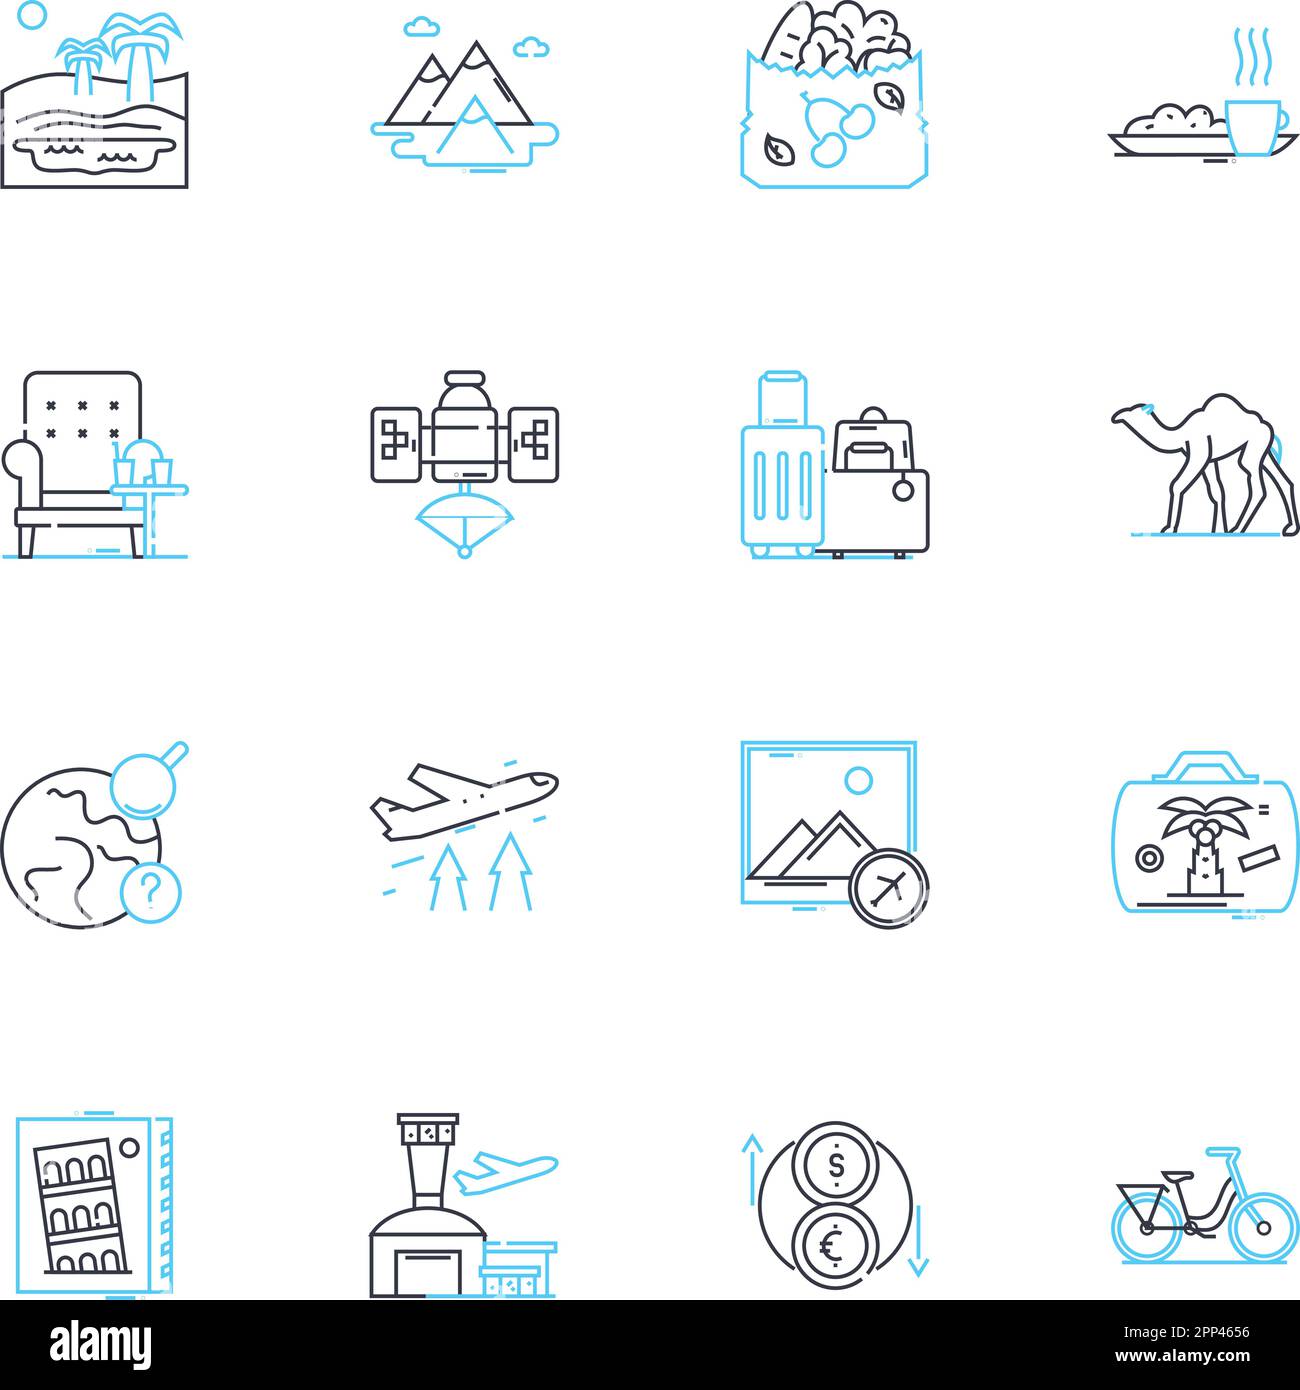 Aerodrome linear icons set. anding, Takeoff, Runway, Hangar, Control Tower, Aircraft, Pilots line vector and concept signs. Ground Services Stock Vector